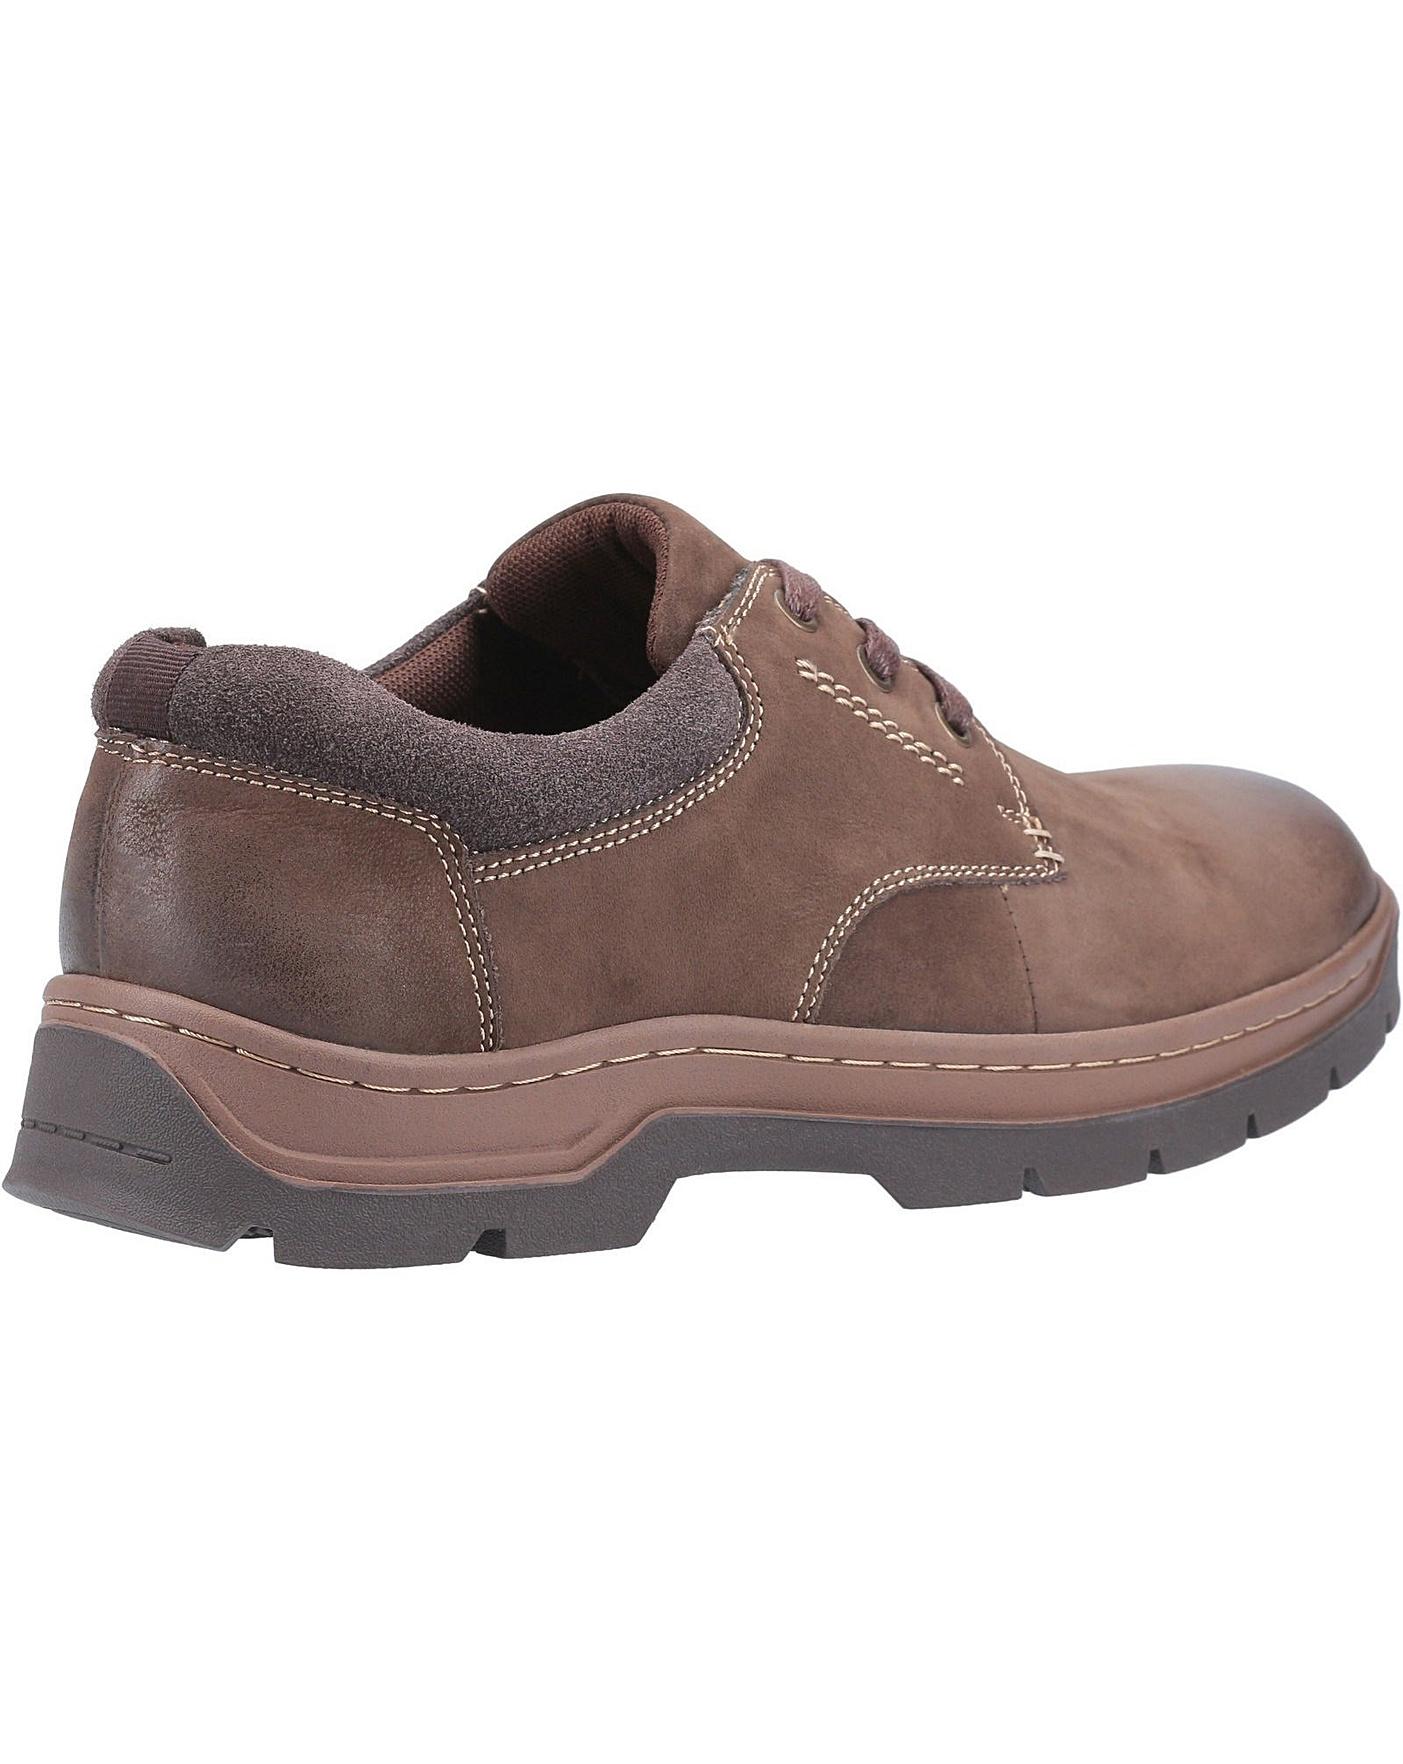 Cotswold Thickwood Burnished Casual Shoe | J D Williams